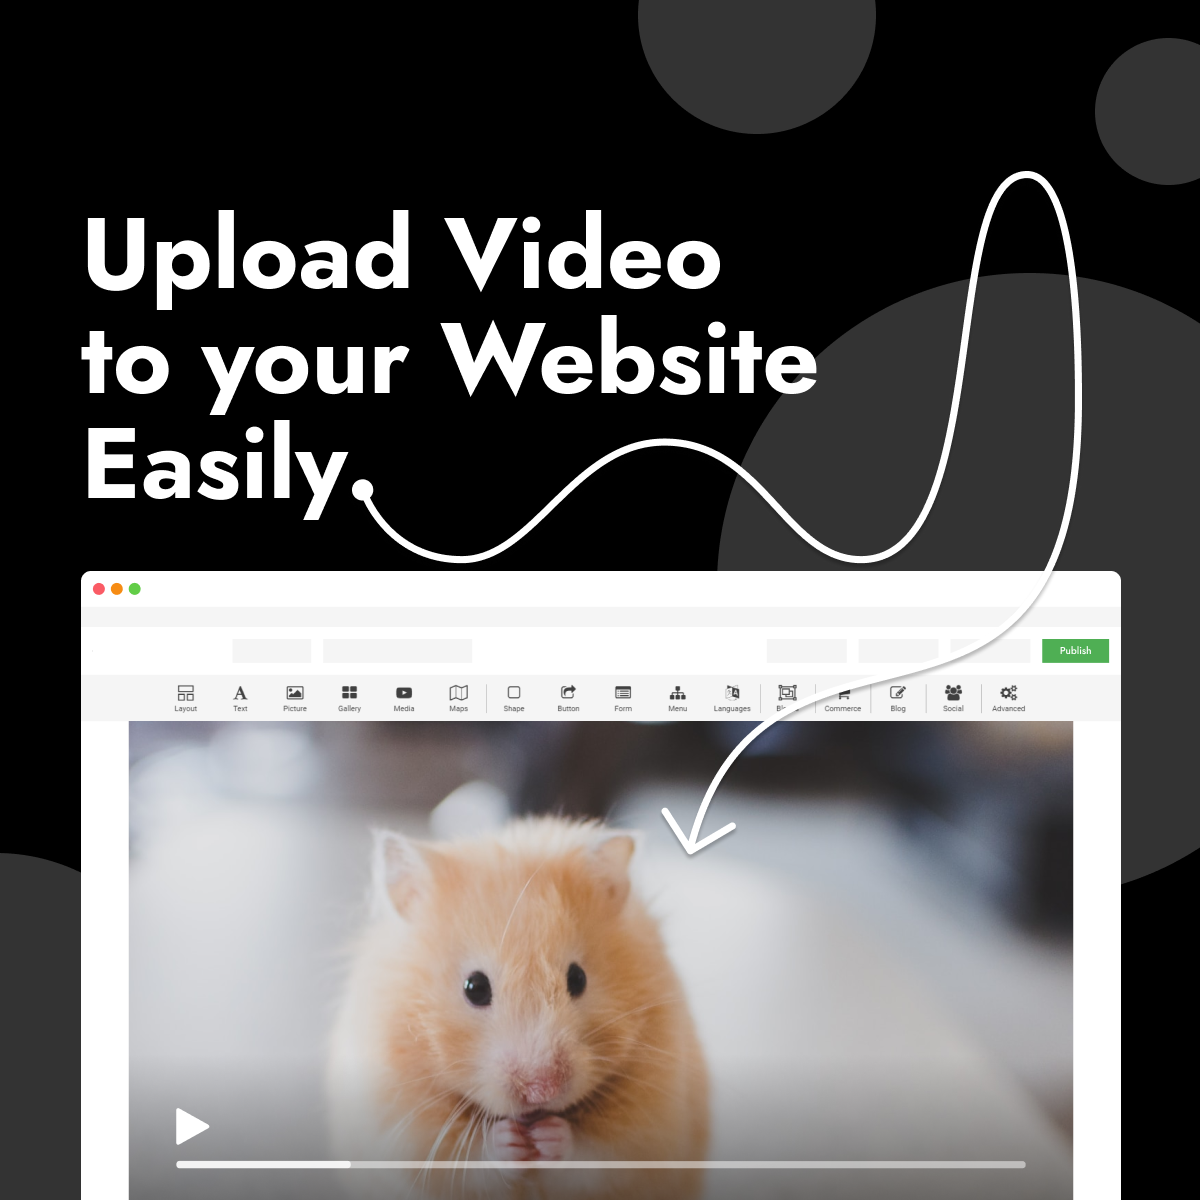 Upload video to your website easily